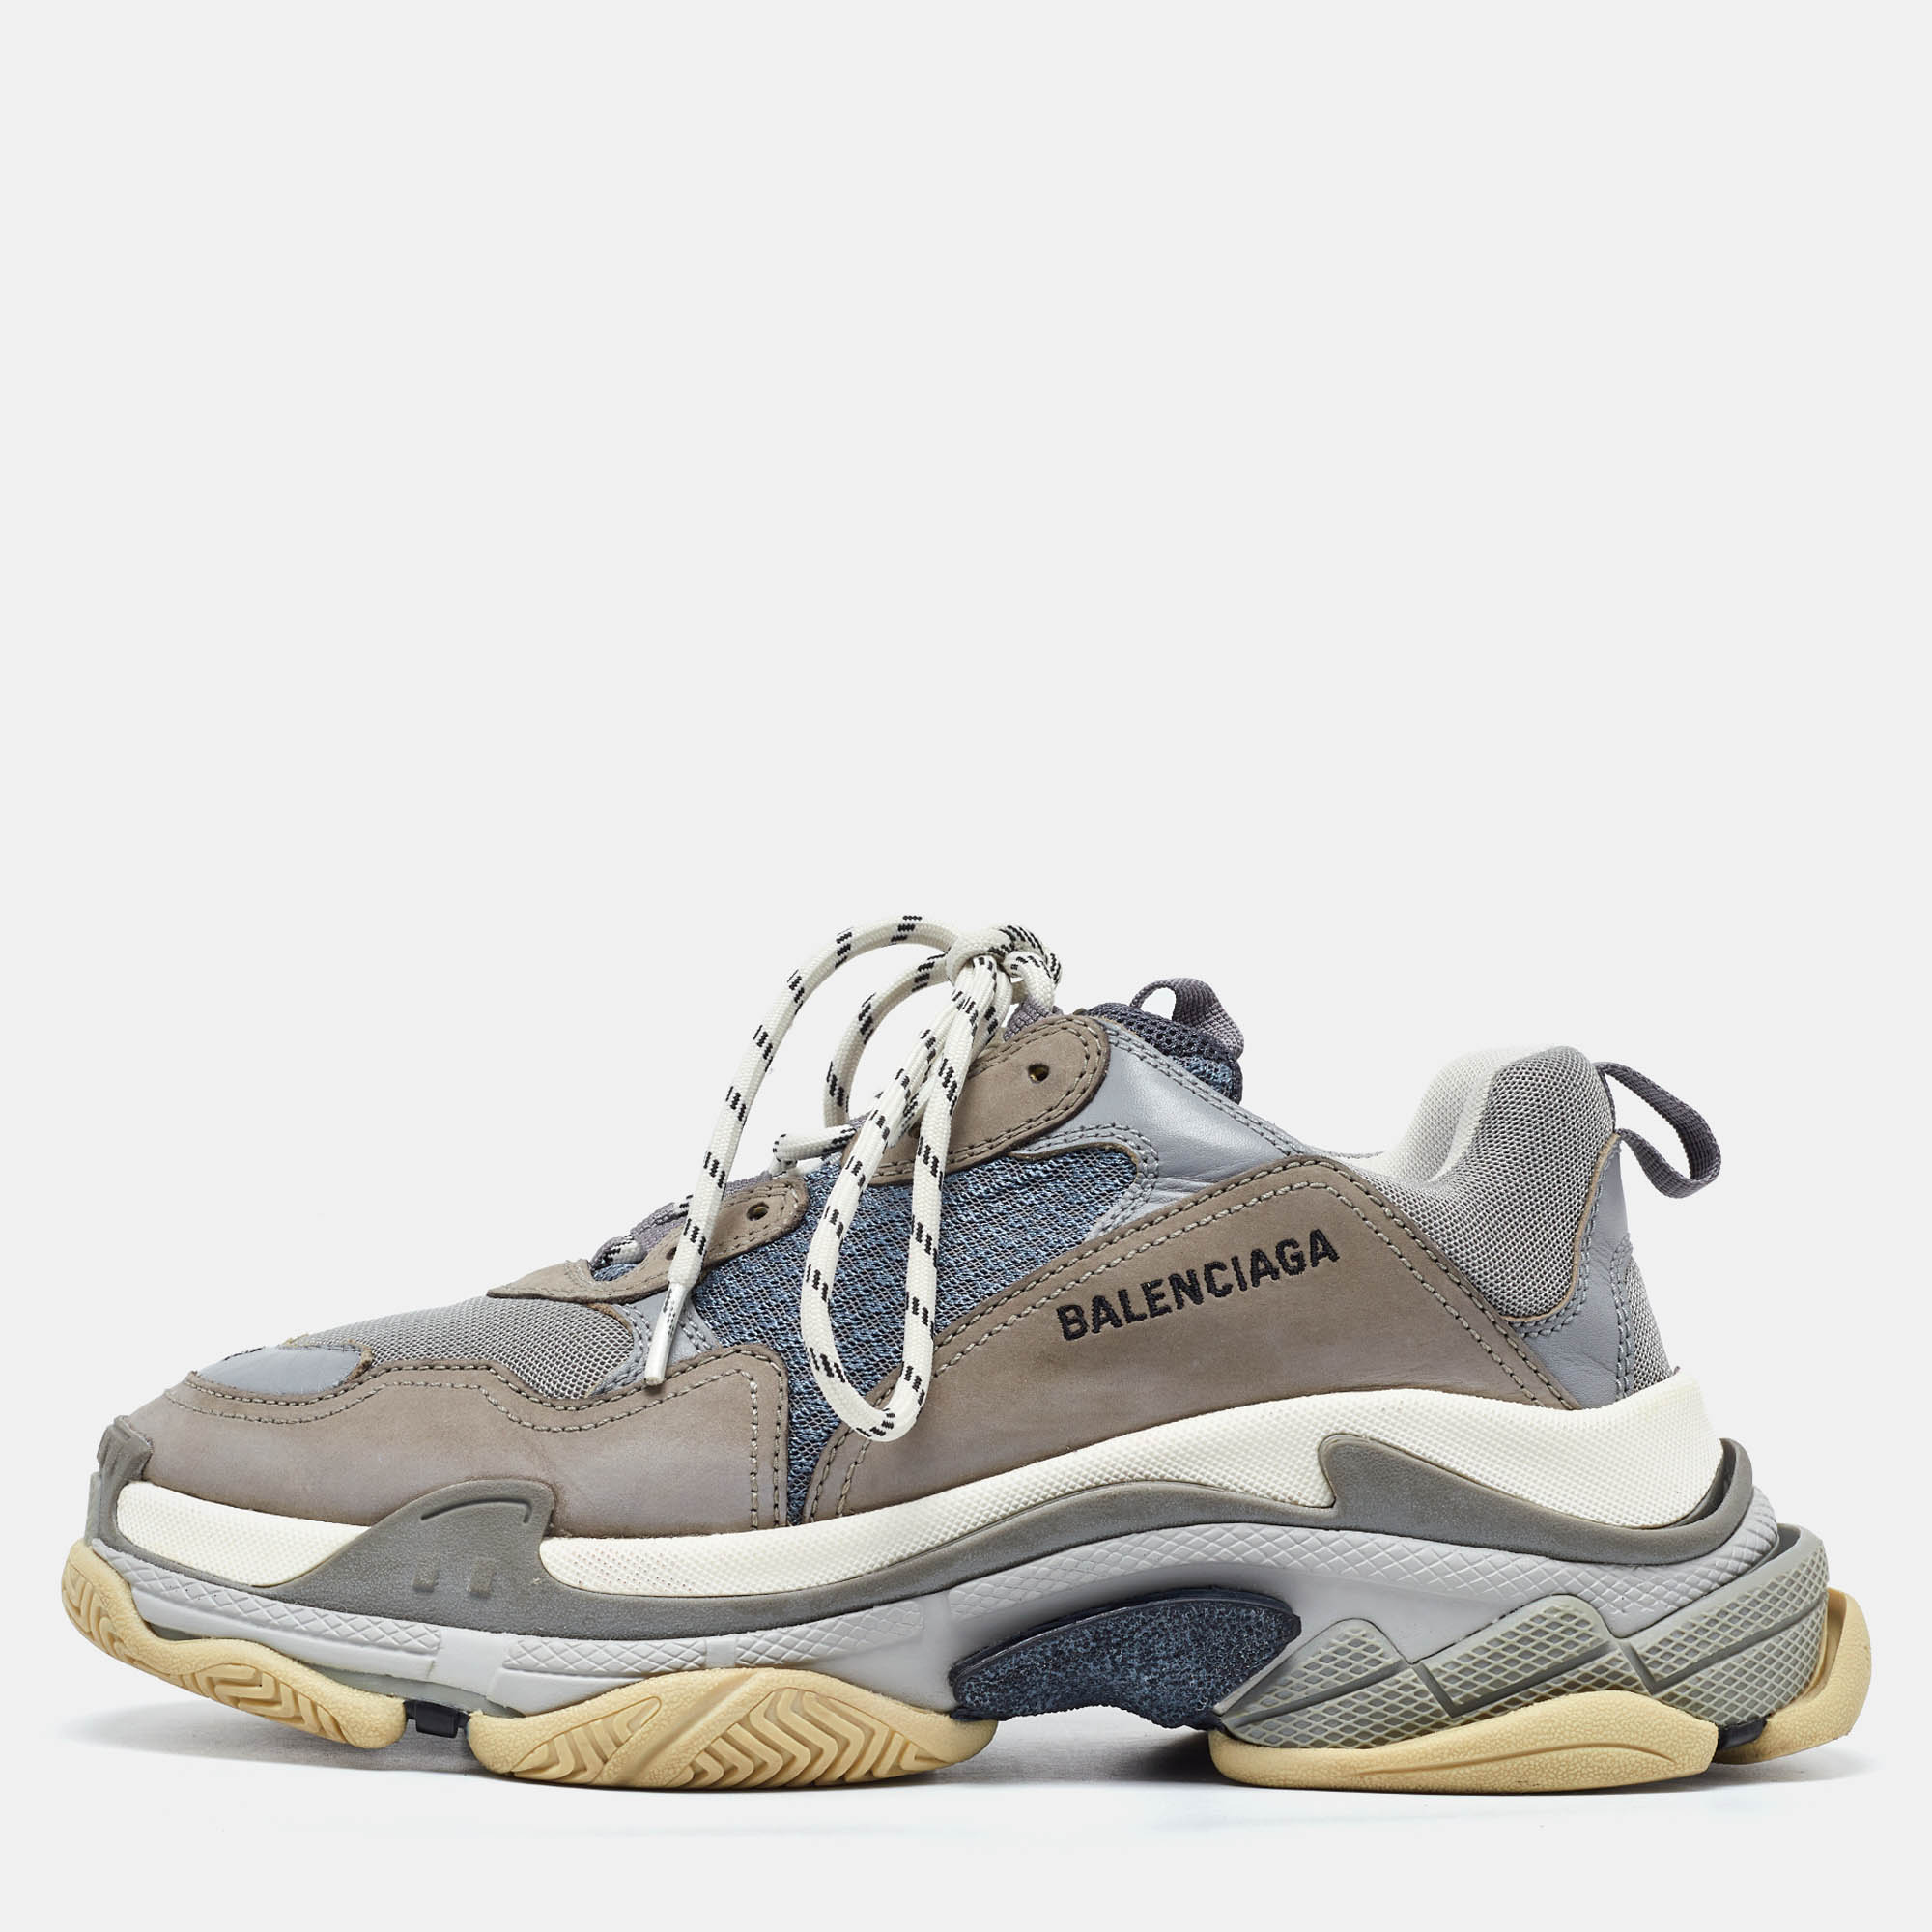 Balenciaga grey nubuck leather and mesh triple s low top sneakers size 42